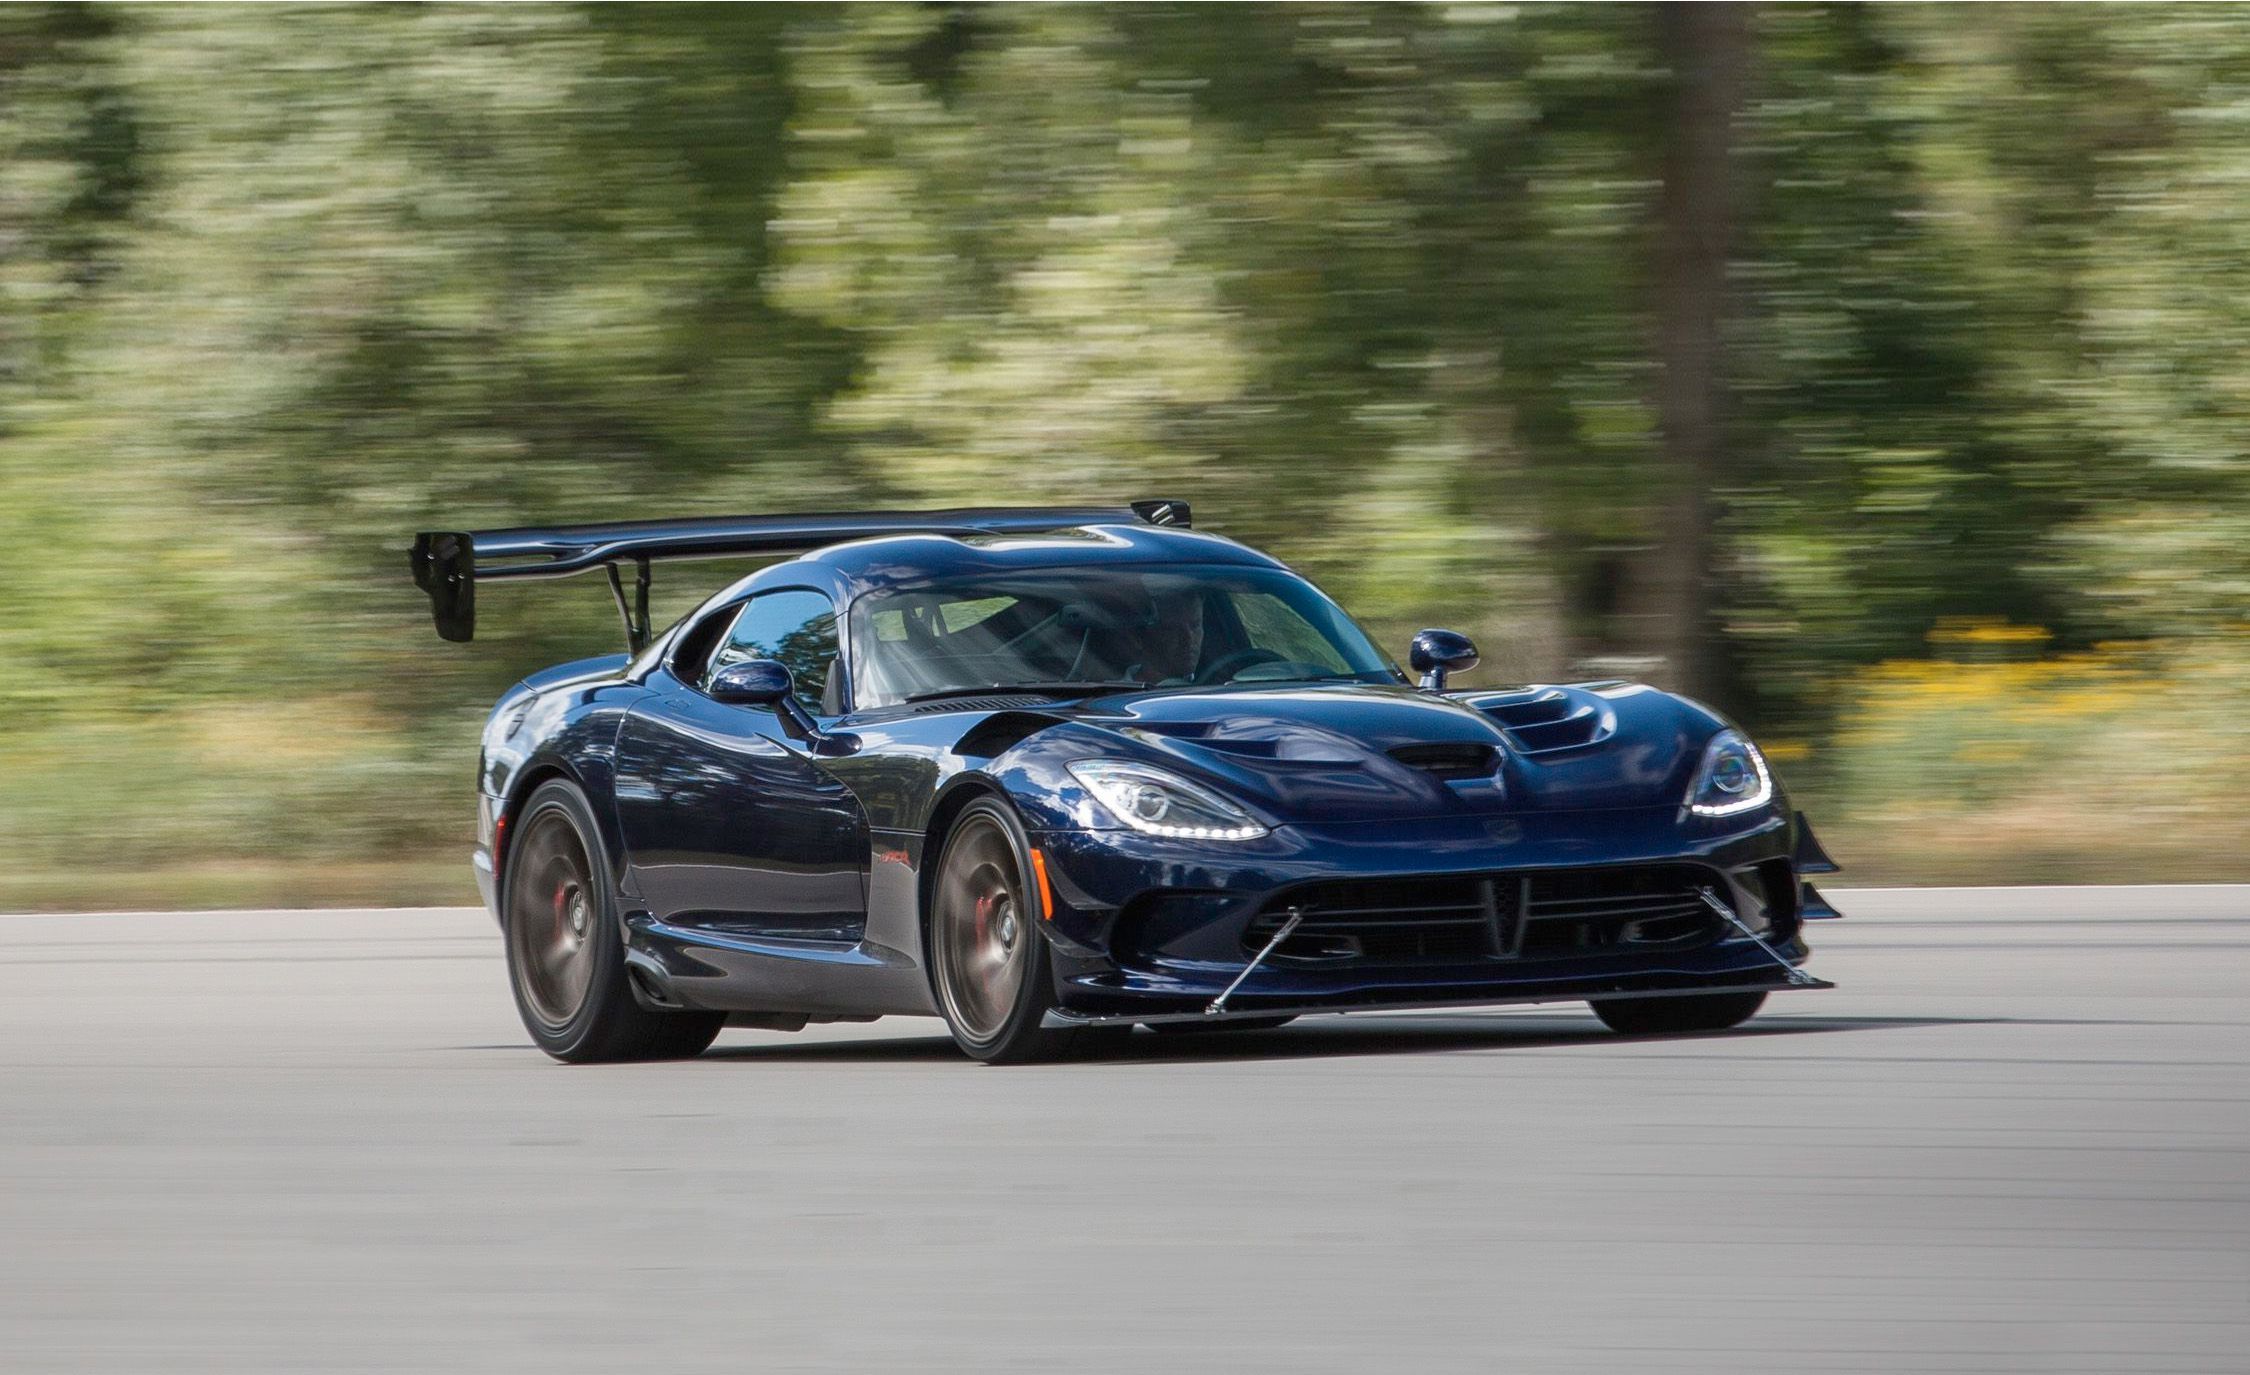 Instrument Ni afbryde 2017 Dodge Viper Review, Pricing, and Specs